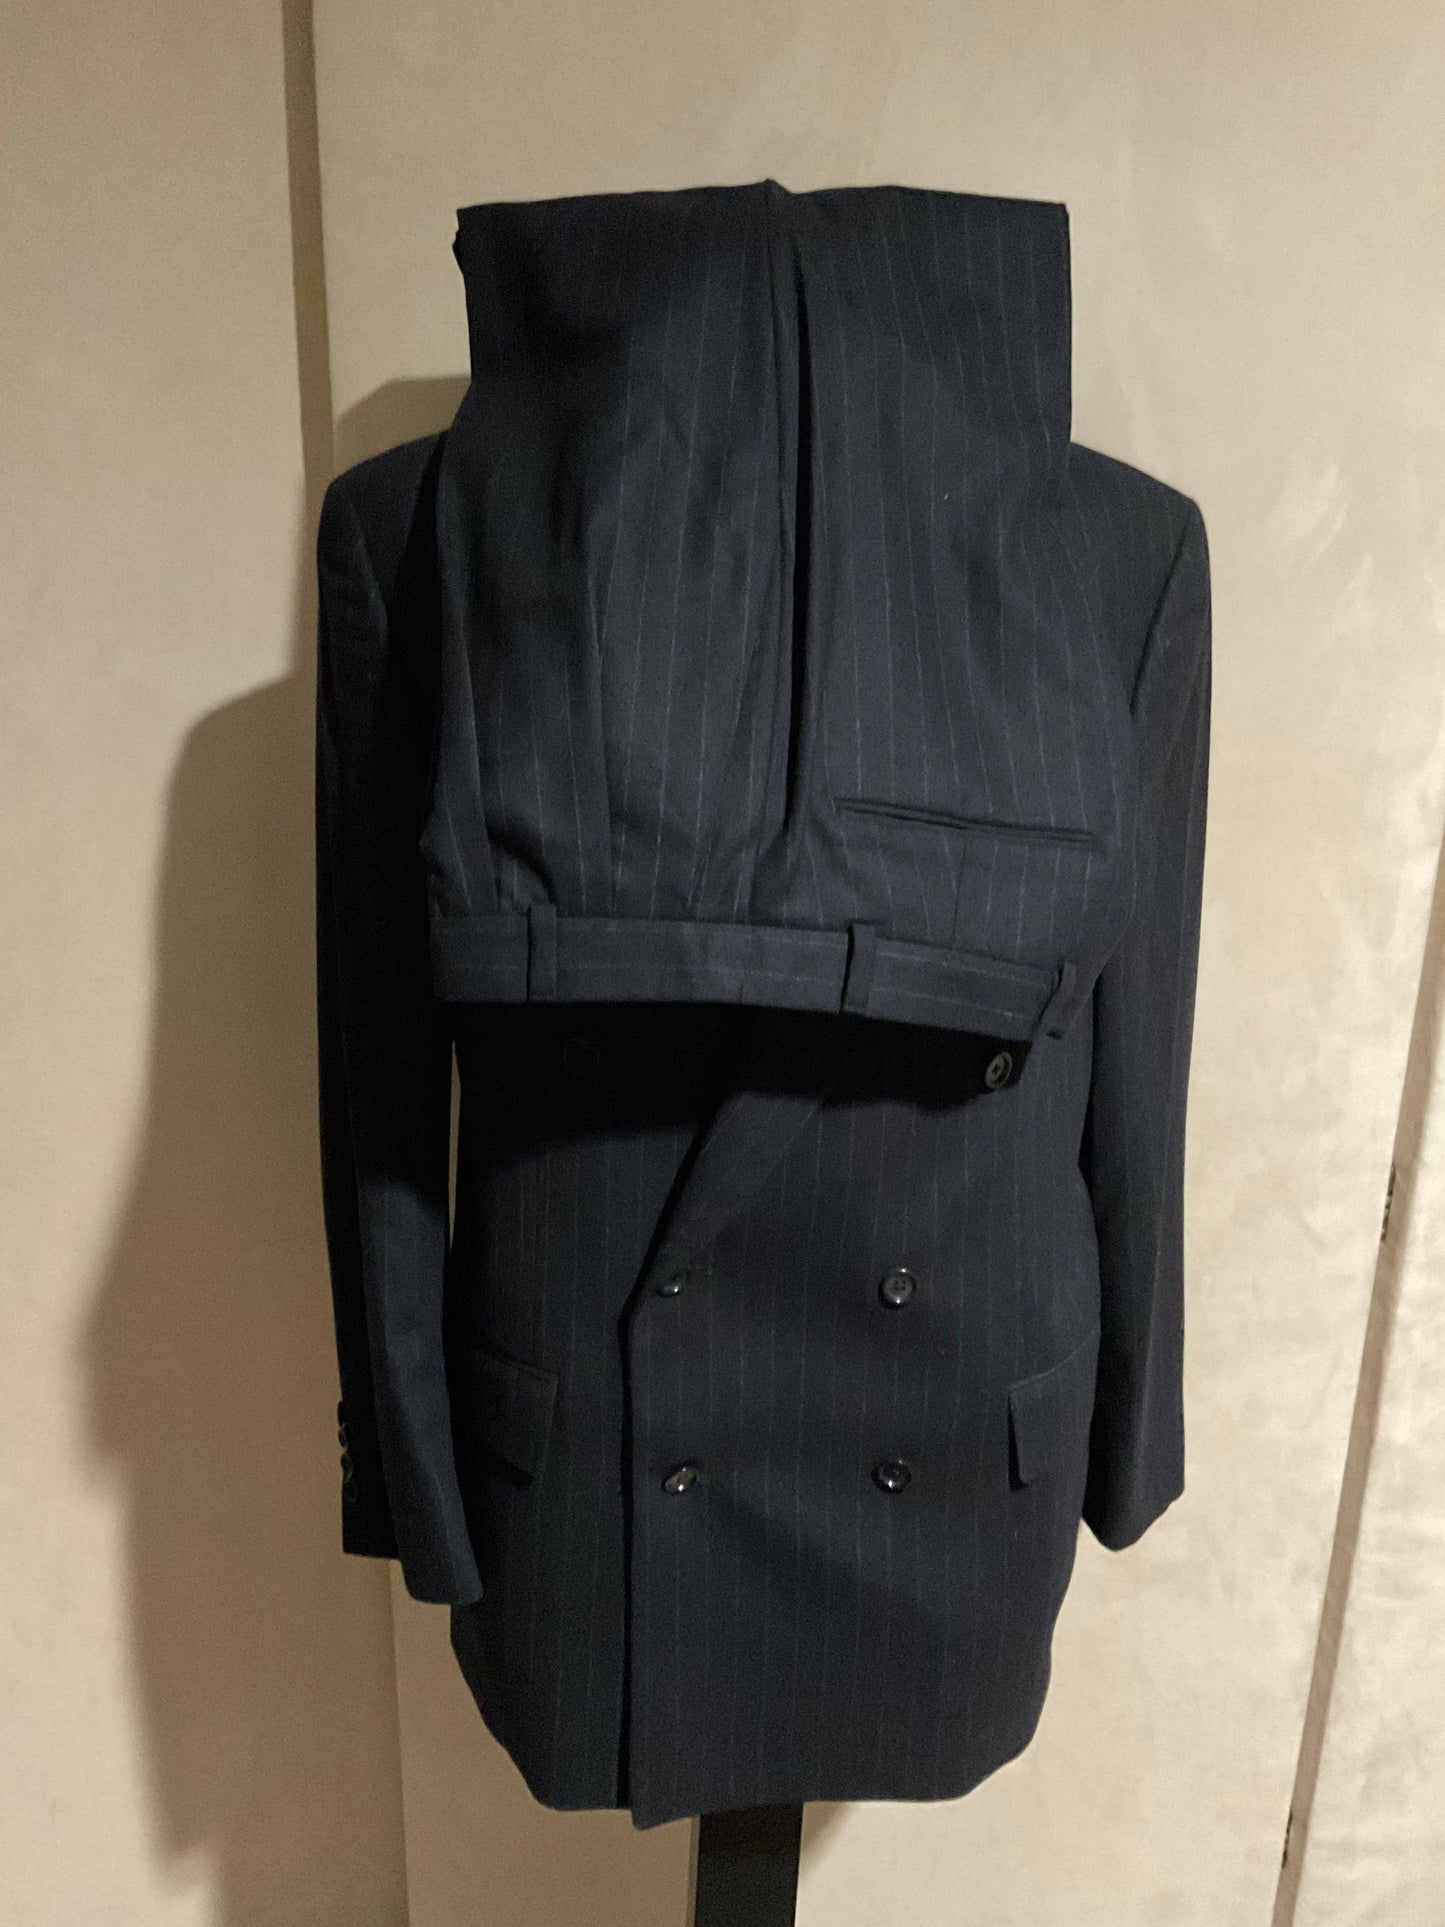 R P SUIT / DOUBLE BREASTED / CASHMERE & WOOL / NAVY CHALK STRIPE / 40 REG / MADE IN CANADA